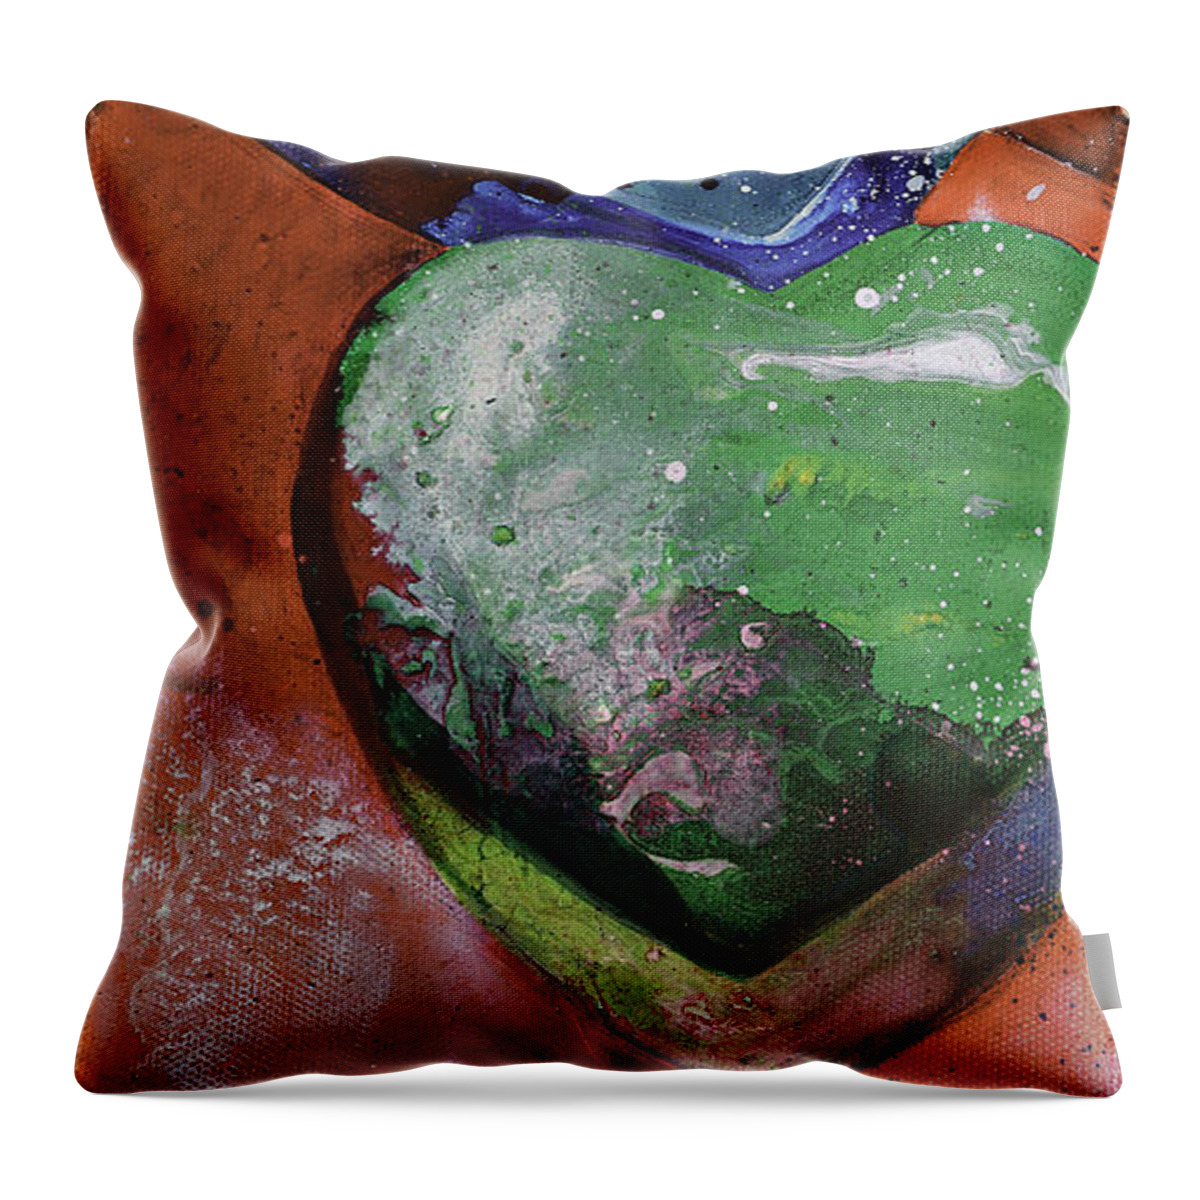 Kasha Ritter Throw Pillow featuring the painting Tina's Heart by Kasha Ritter